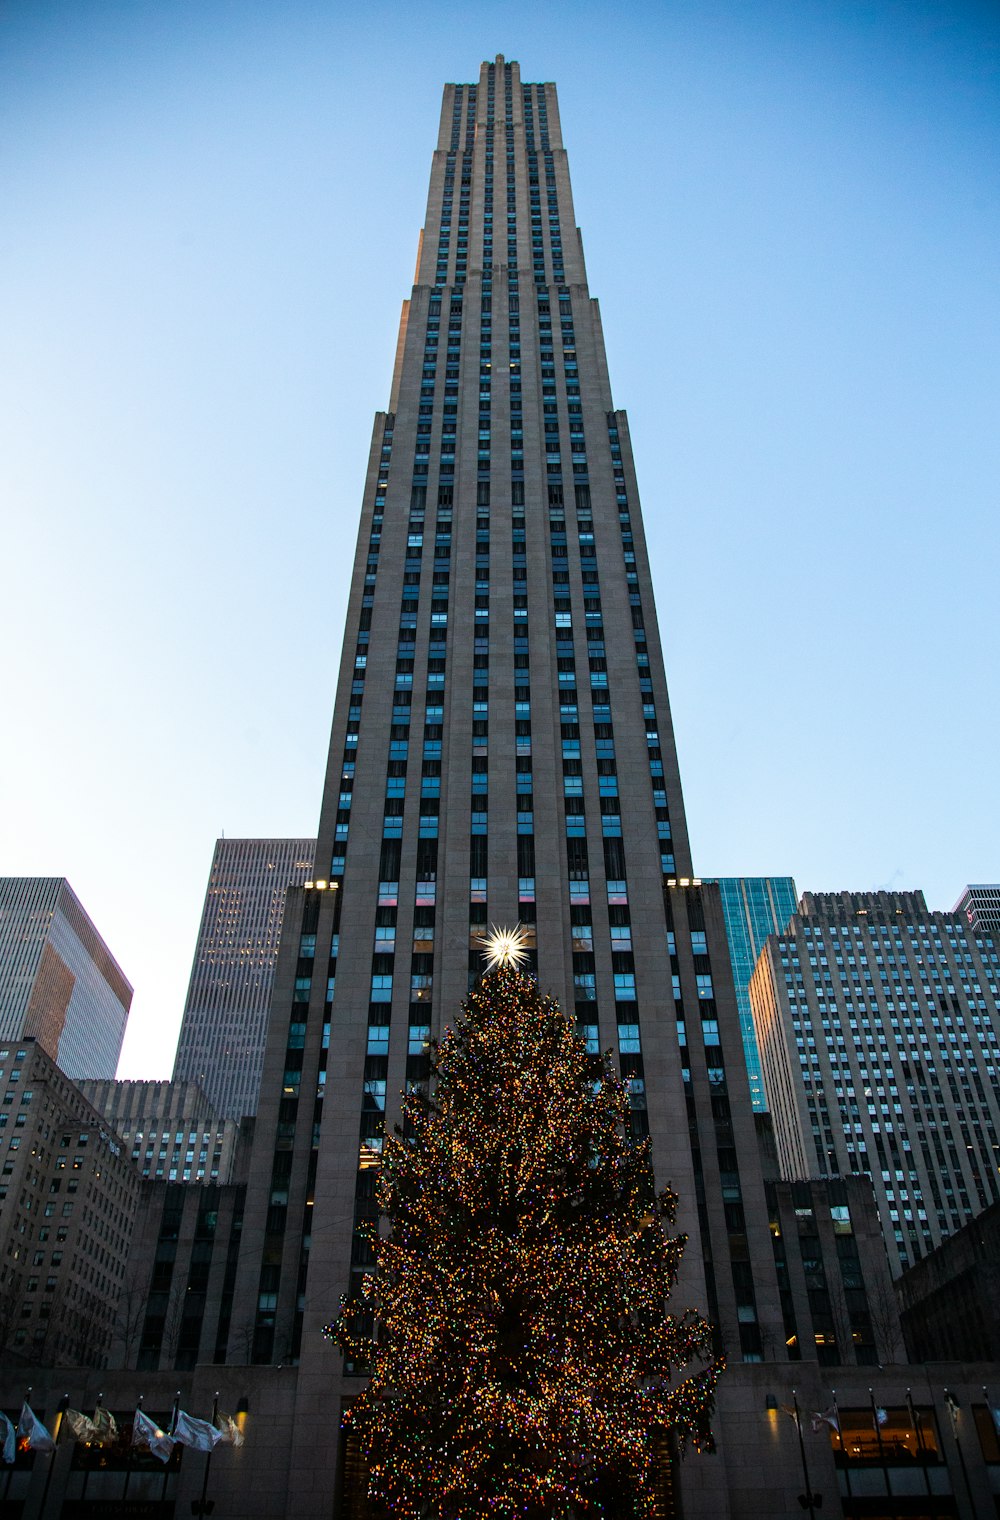 a large christmas tree in front of a tall building